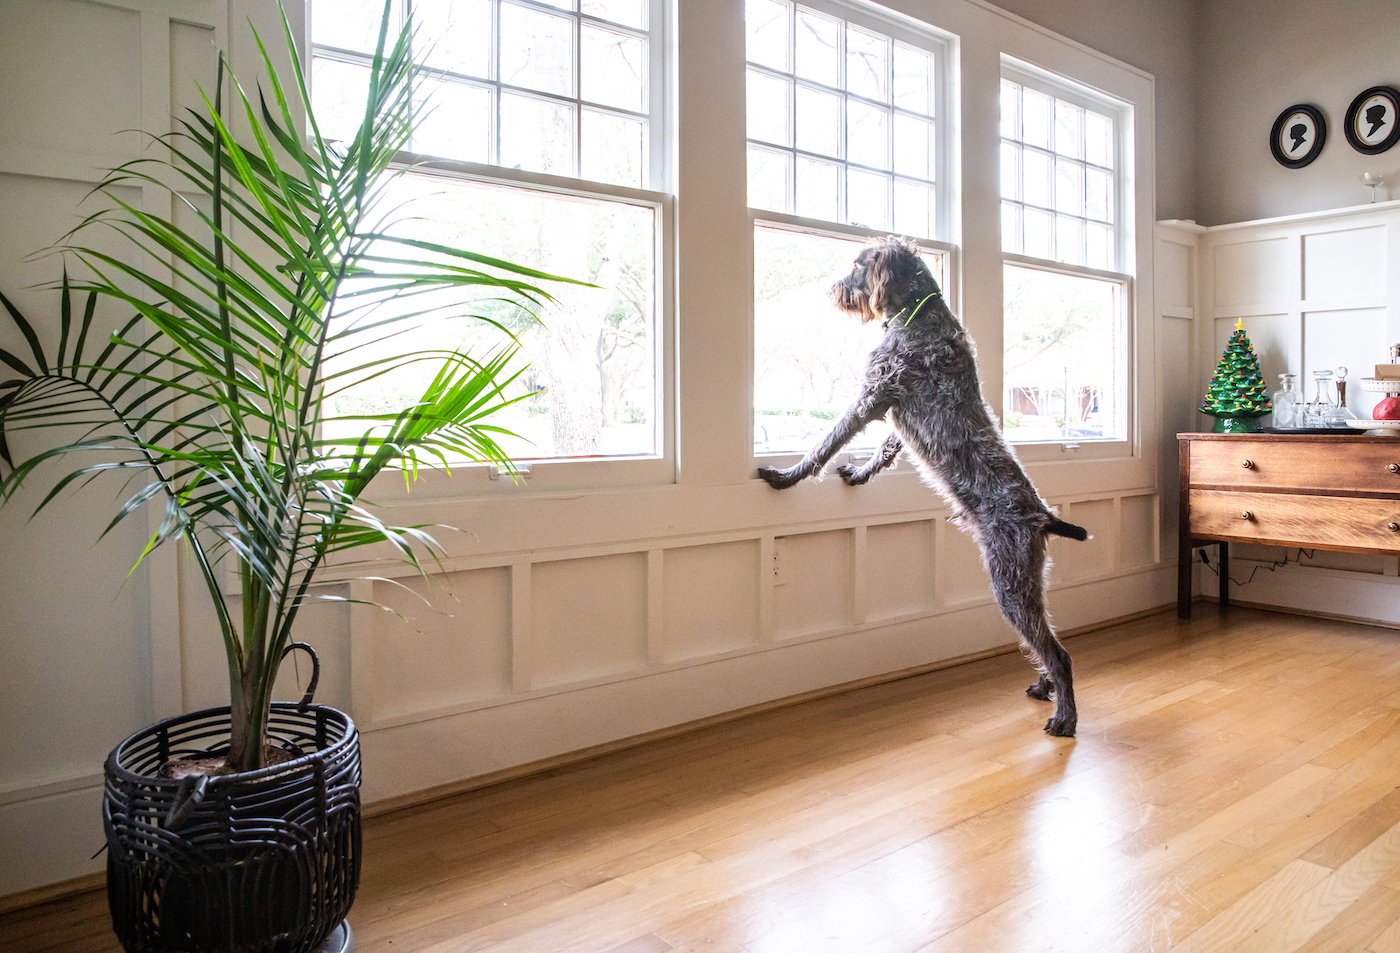 kate-thacker-home-interior-designer-dog-looking-out-window